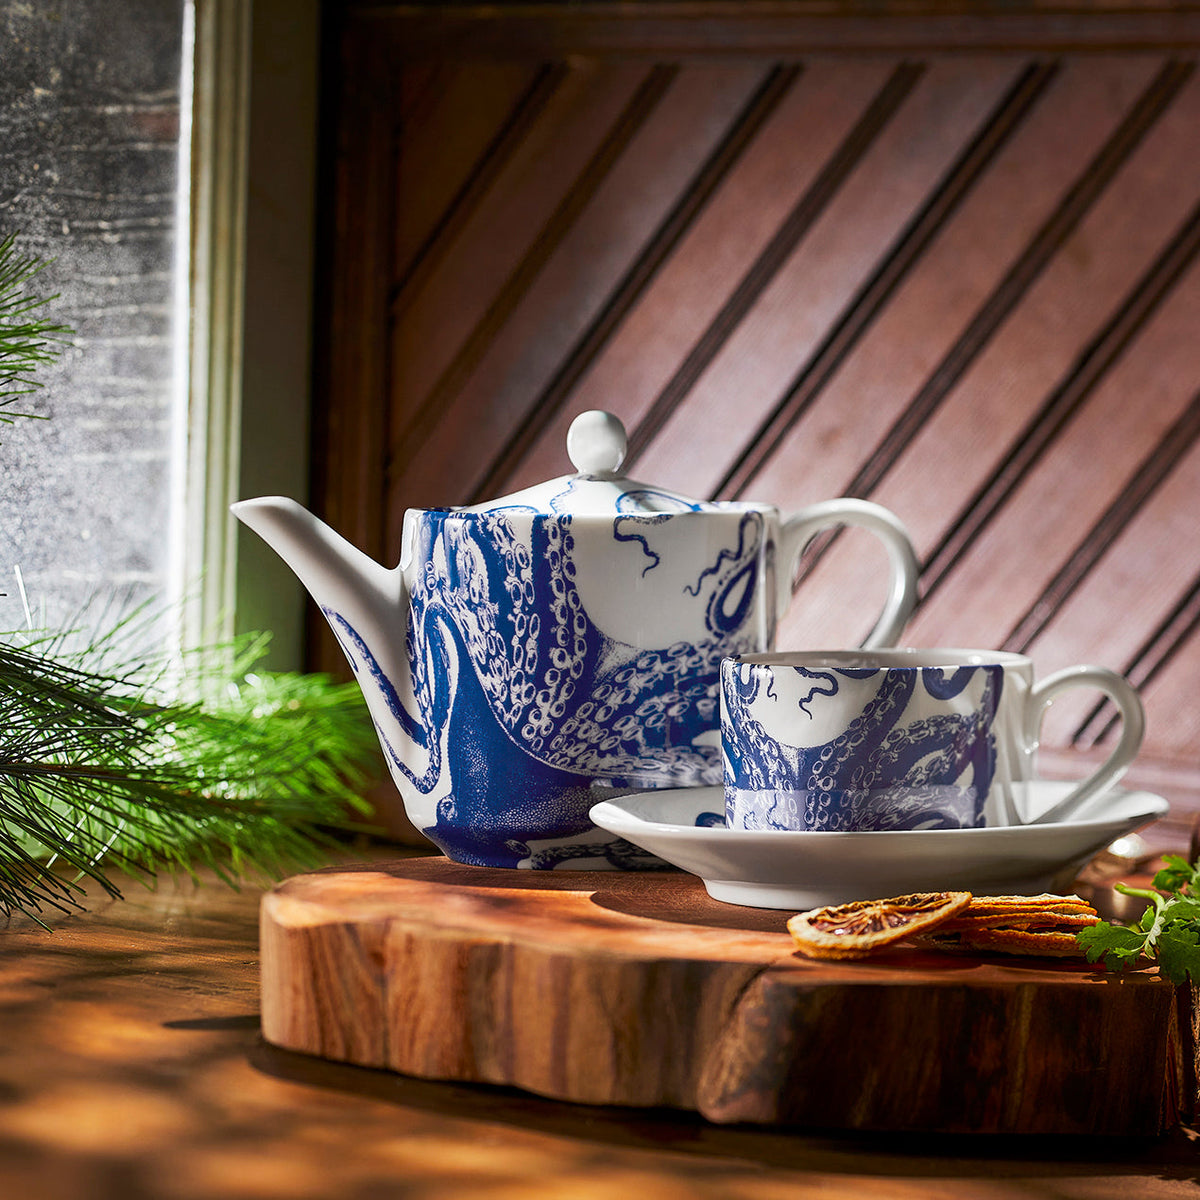 A Lucy Petite Teapot by Caskata and a hand-decorated cup sit on a wooden cutting board.